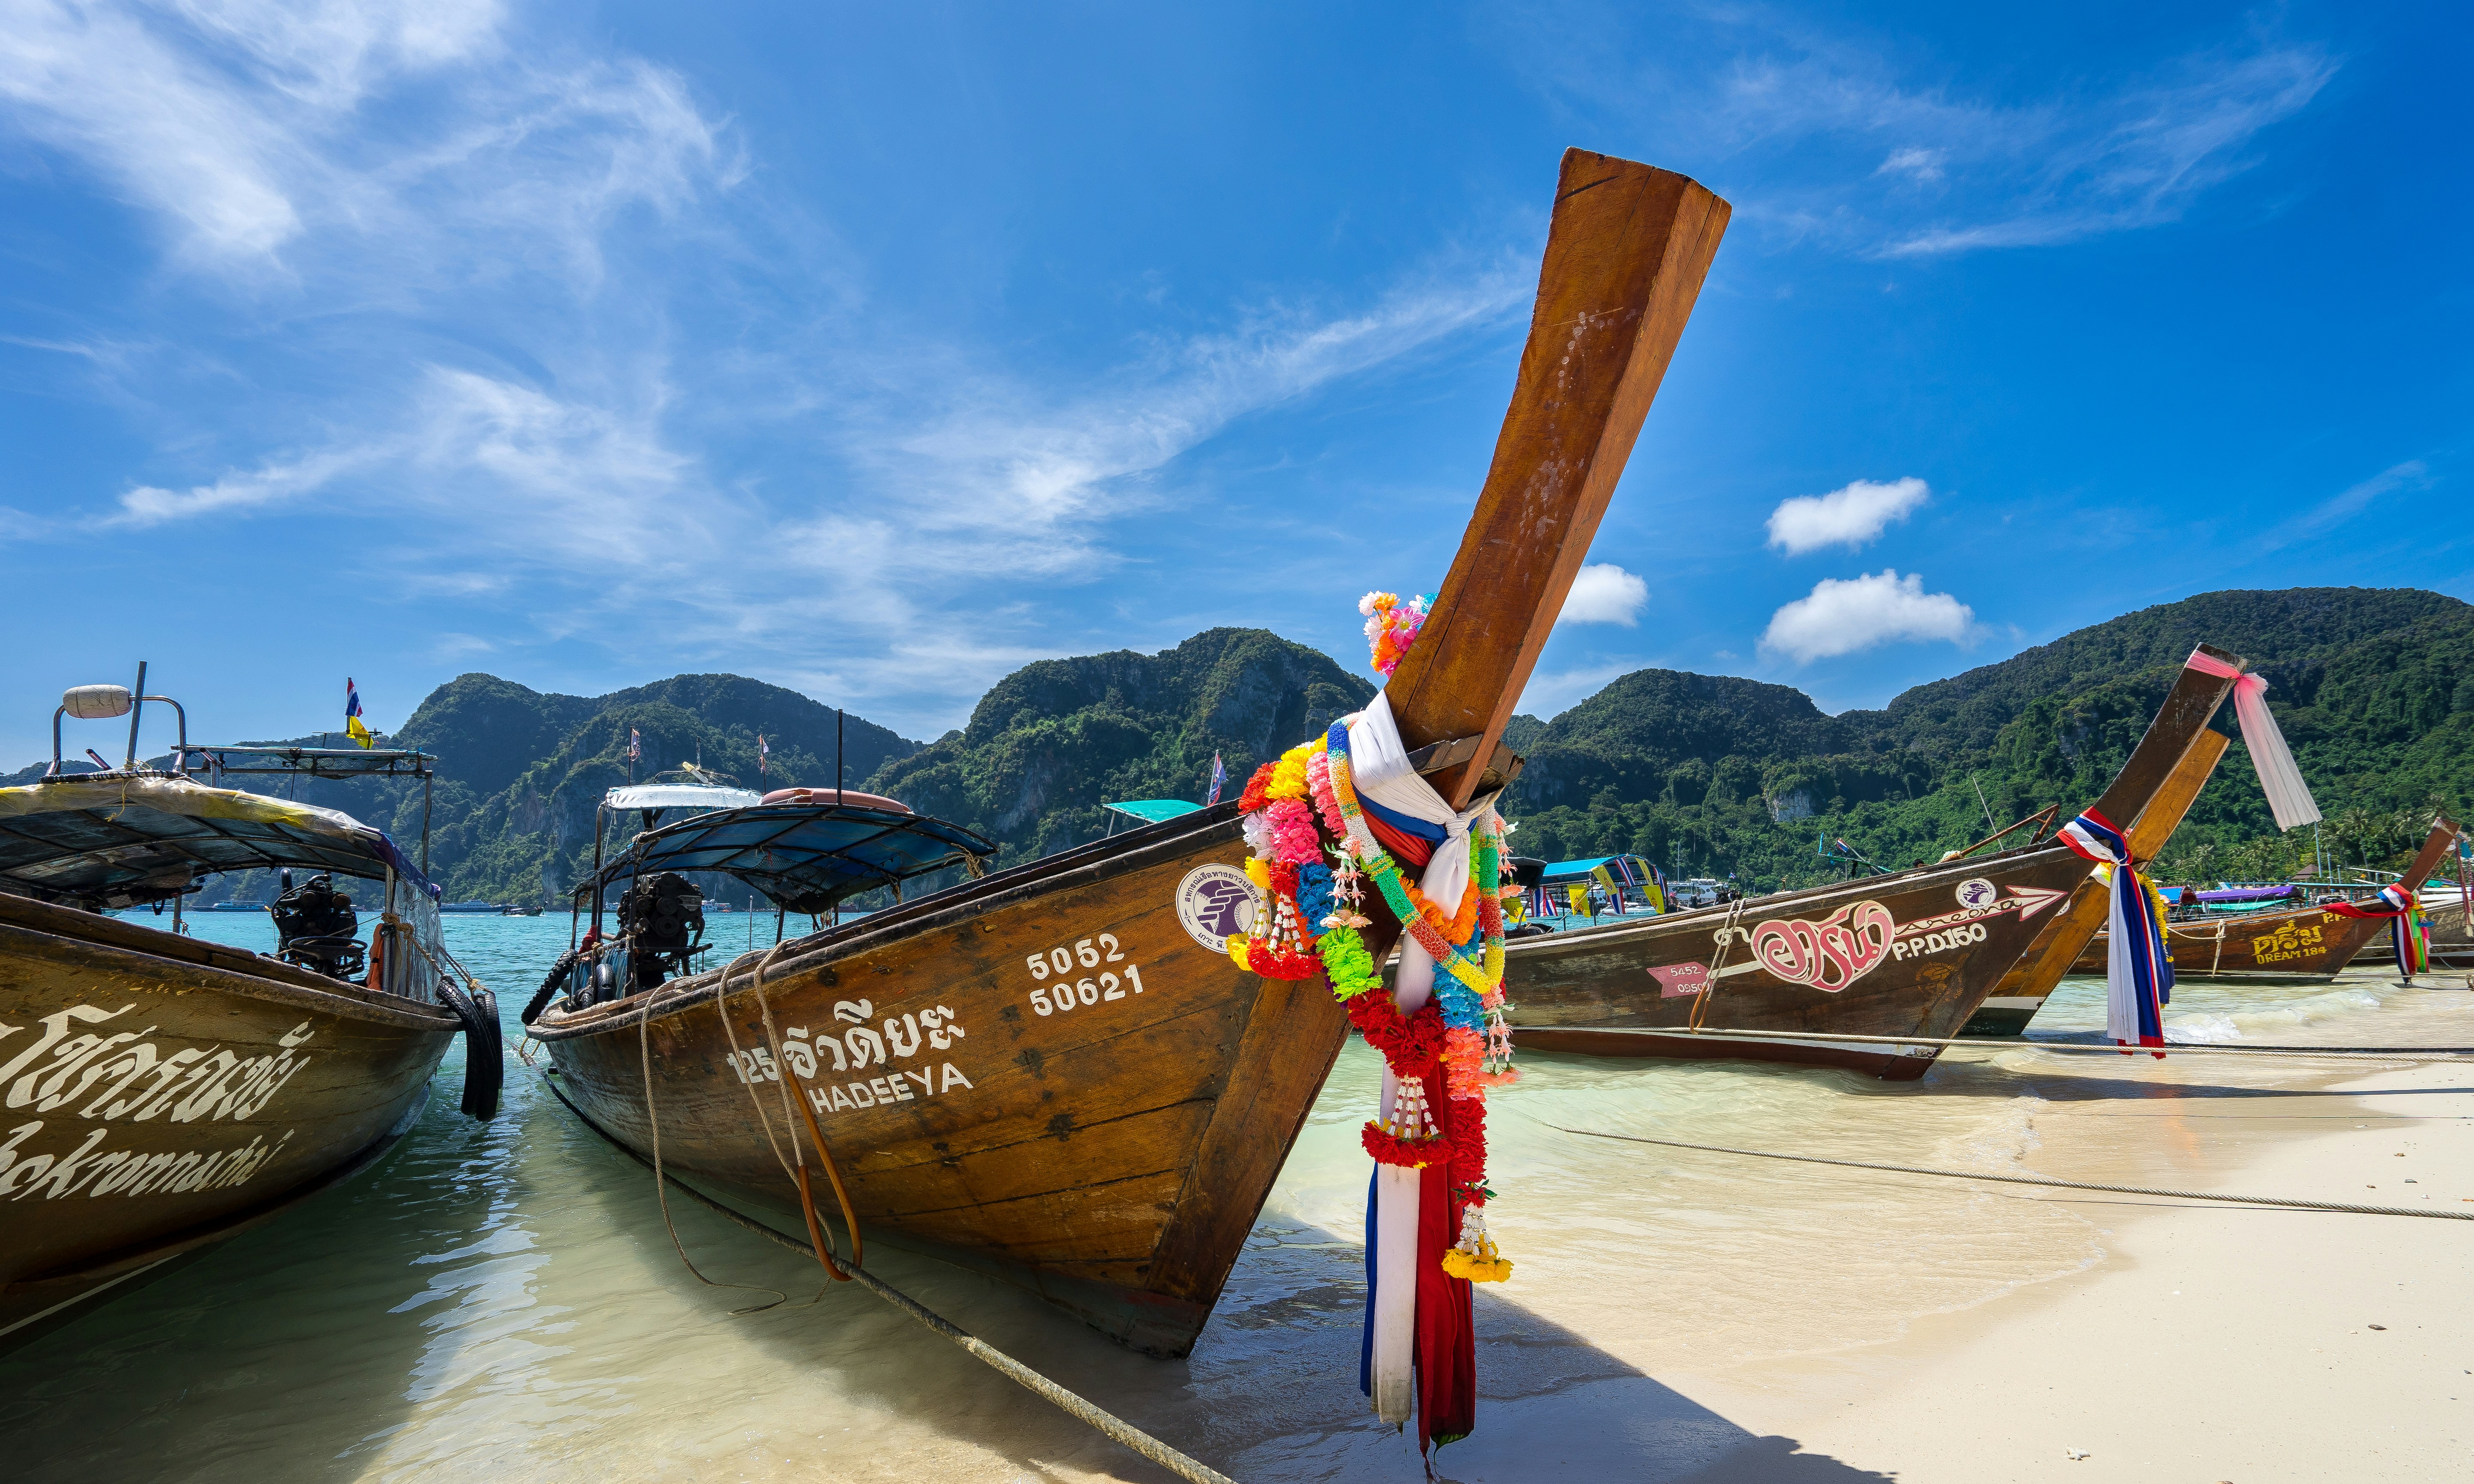 Wandering the beach in the morning, I captured this one of the long tail boats waiting for a busy day of tourist action on: Koh Phi Phi, Thailand \r</p>
<p>\r</p>
<p>View more on my website: http://www.frankieboyphotography.com/\r</p>
<p>\r</p>
<p>Check out my instagram: instagram.com/fr33water/” style=”max-width:450px;float:left;padding:10px 10px 10px 0px;border:0px;”>Overview of Thailand Rehab Facilities:</p>
<p>Thailand houses numerous rehab facilities that appeal to many addictions, including medications, alcoholic beverages, gambling, and behavioral conditions. These centers offer residential treatment programs, outpatient solutions, and aftercare assistance. The favorite rehab facilities in Thailand are notable for their advanced facilities, experienced staff, and integration of holistic therapies alongside evidence-based techniques, guaranteeing an extensive approach to recovery.</p>
<p>Benefits of <a href=